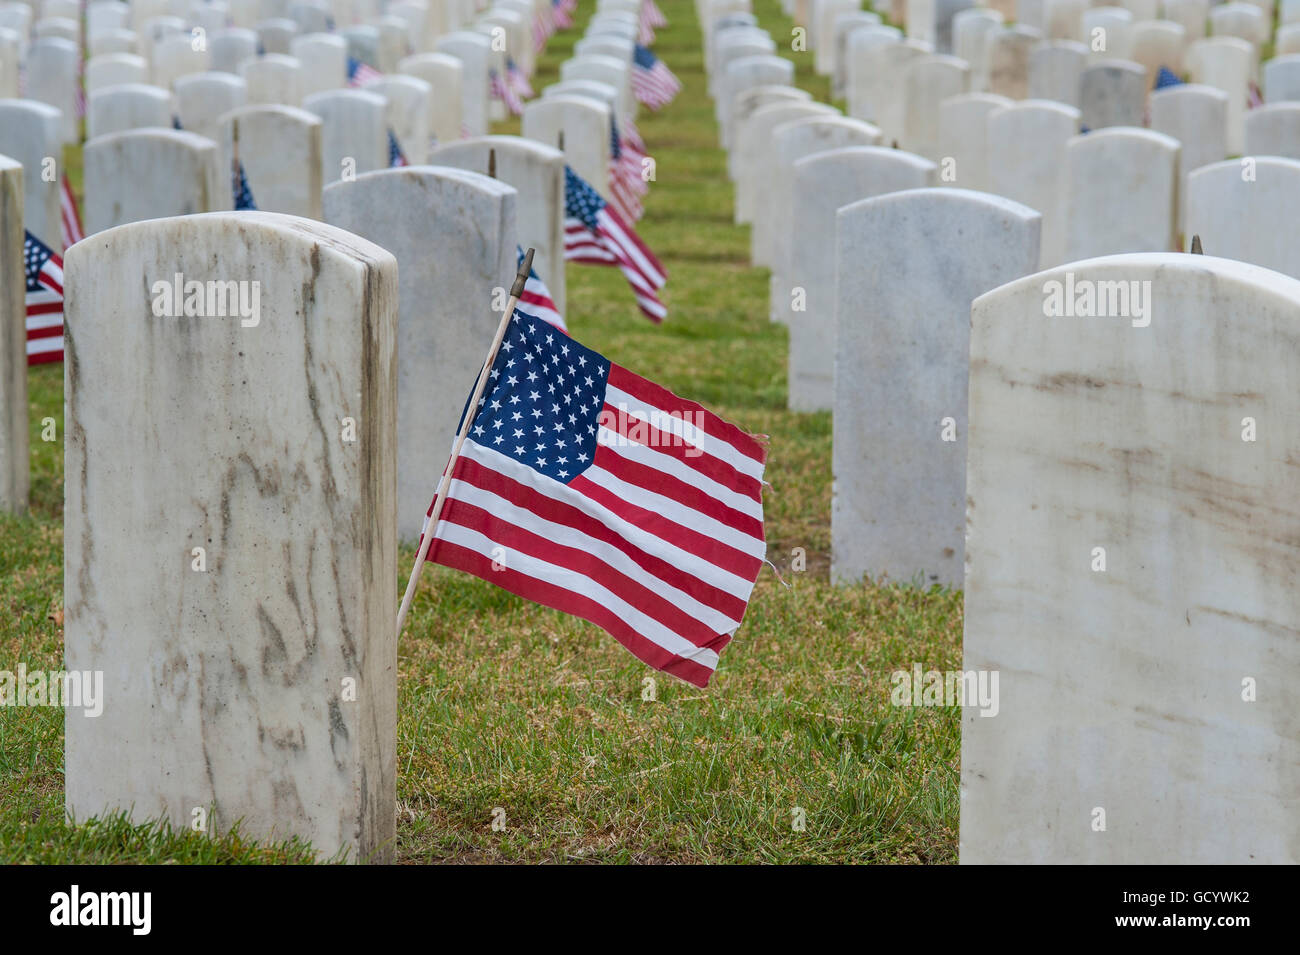 Memorial Day Ceremony at cemetery with American Flags at grave sites Stock Photo